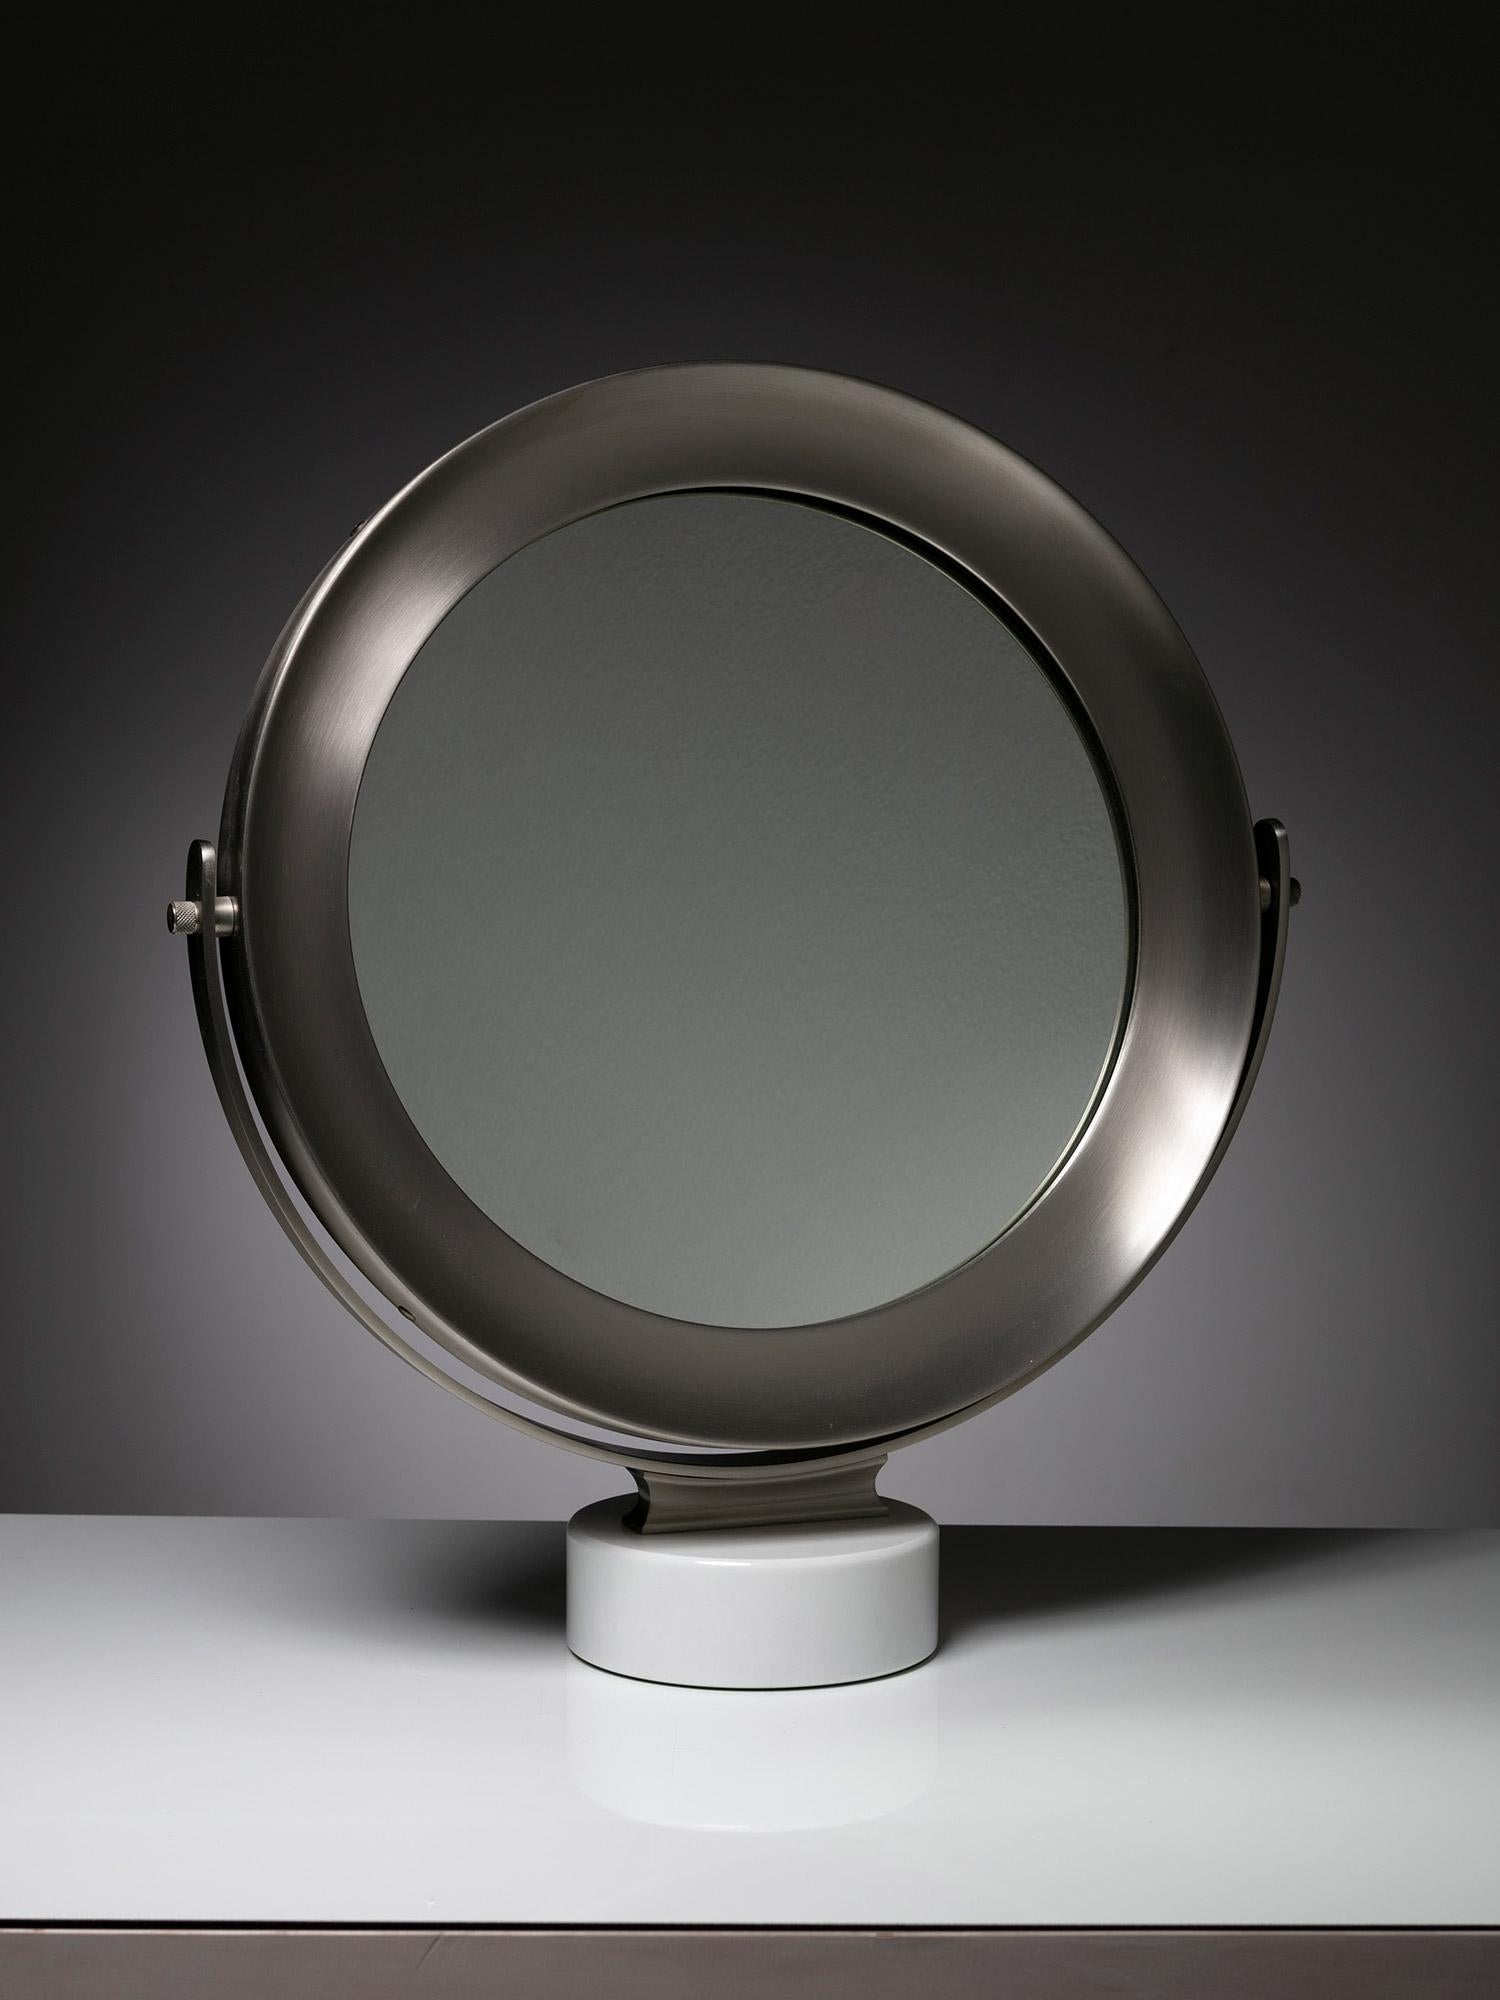 Narciso table mirror by Sergio Mazza for Artemide.
Carrara marble base and adjustable metal frame.